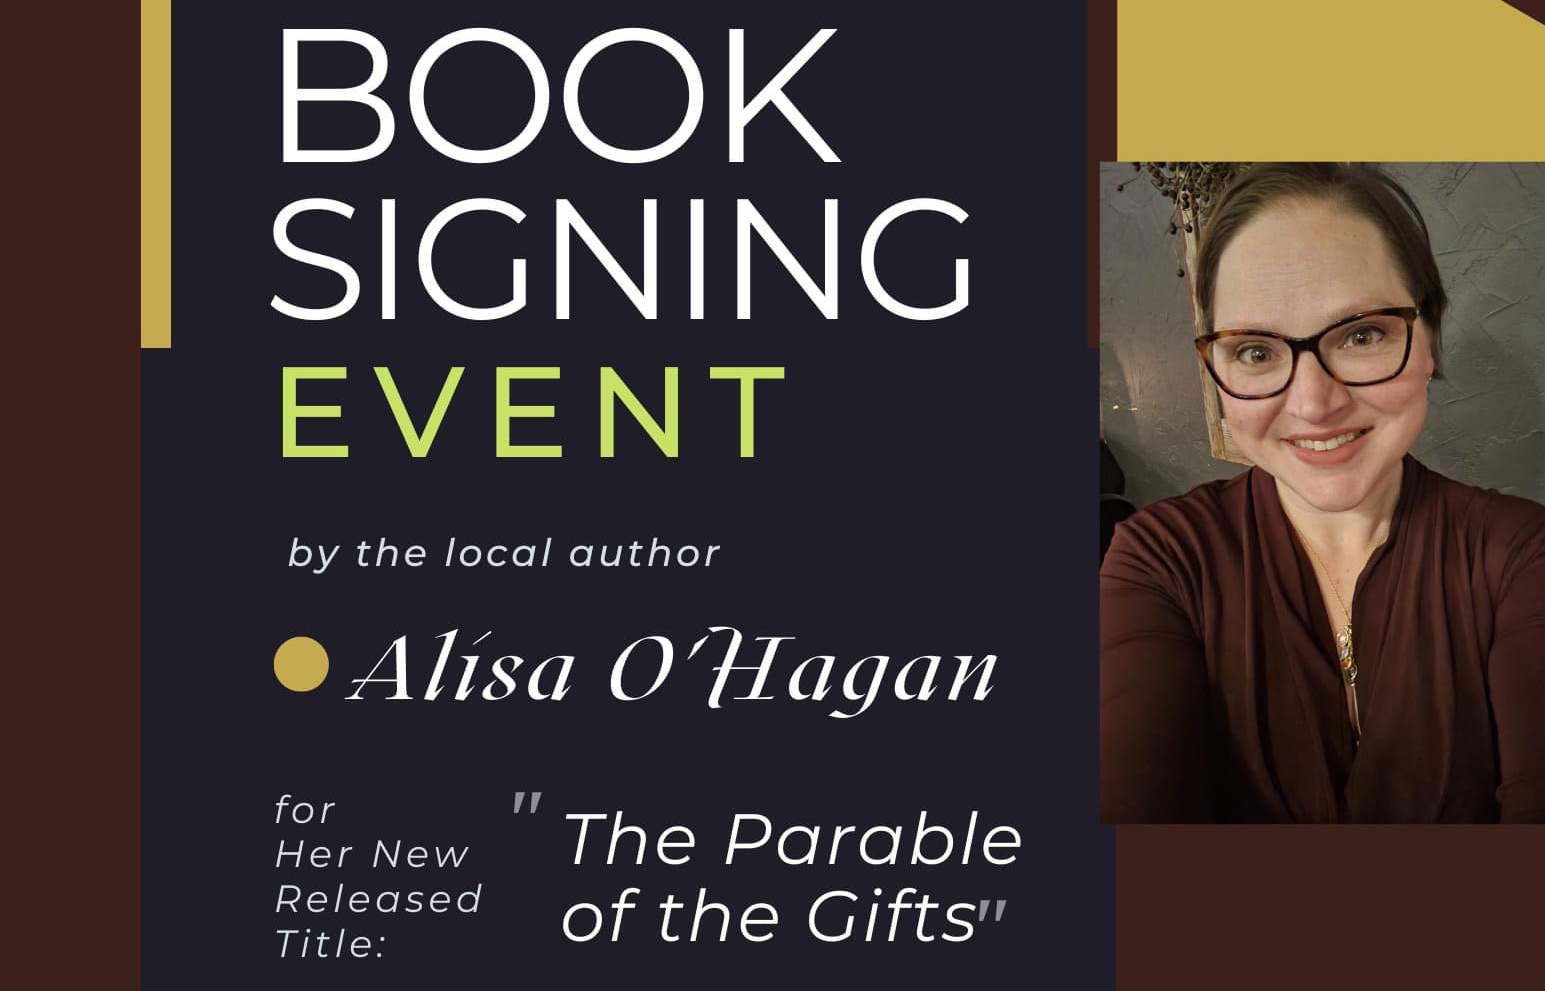 Cropped version of flyer for Alisa O'Hagan's book signing at Market on Main in Sackets Harbor